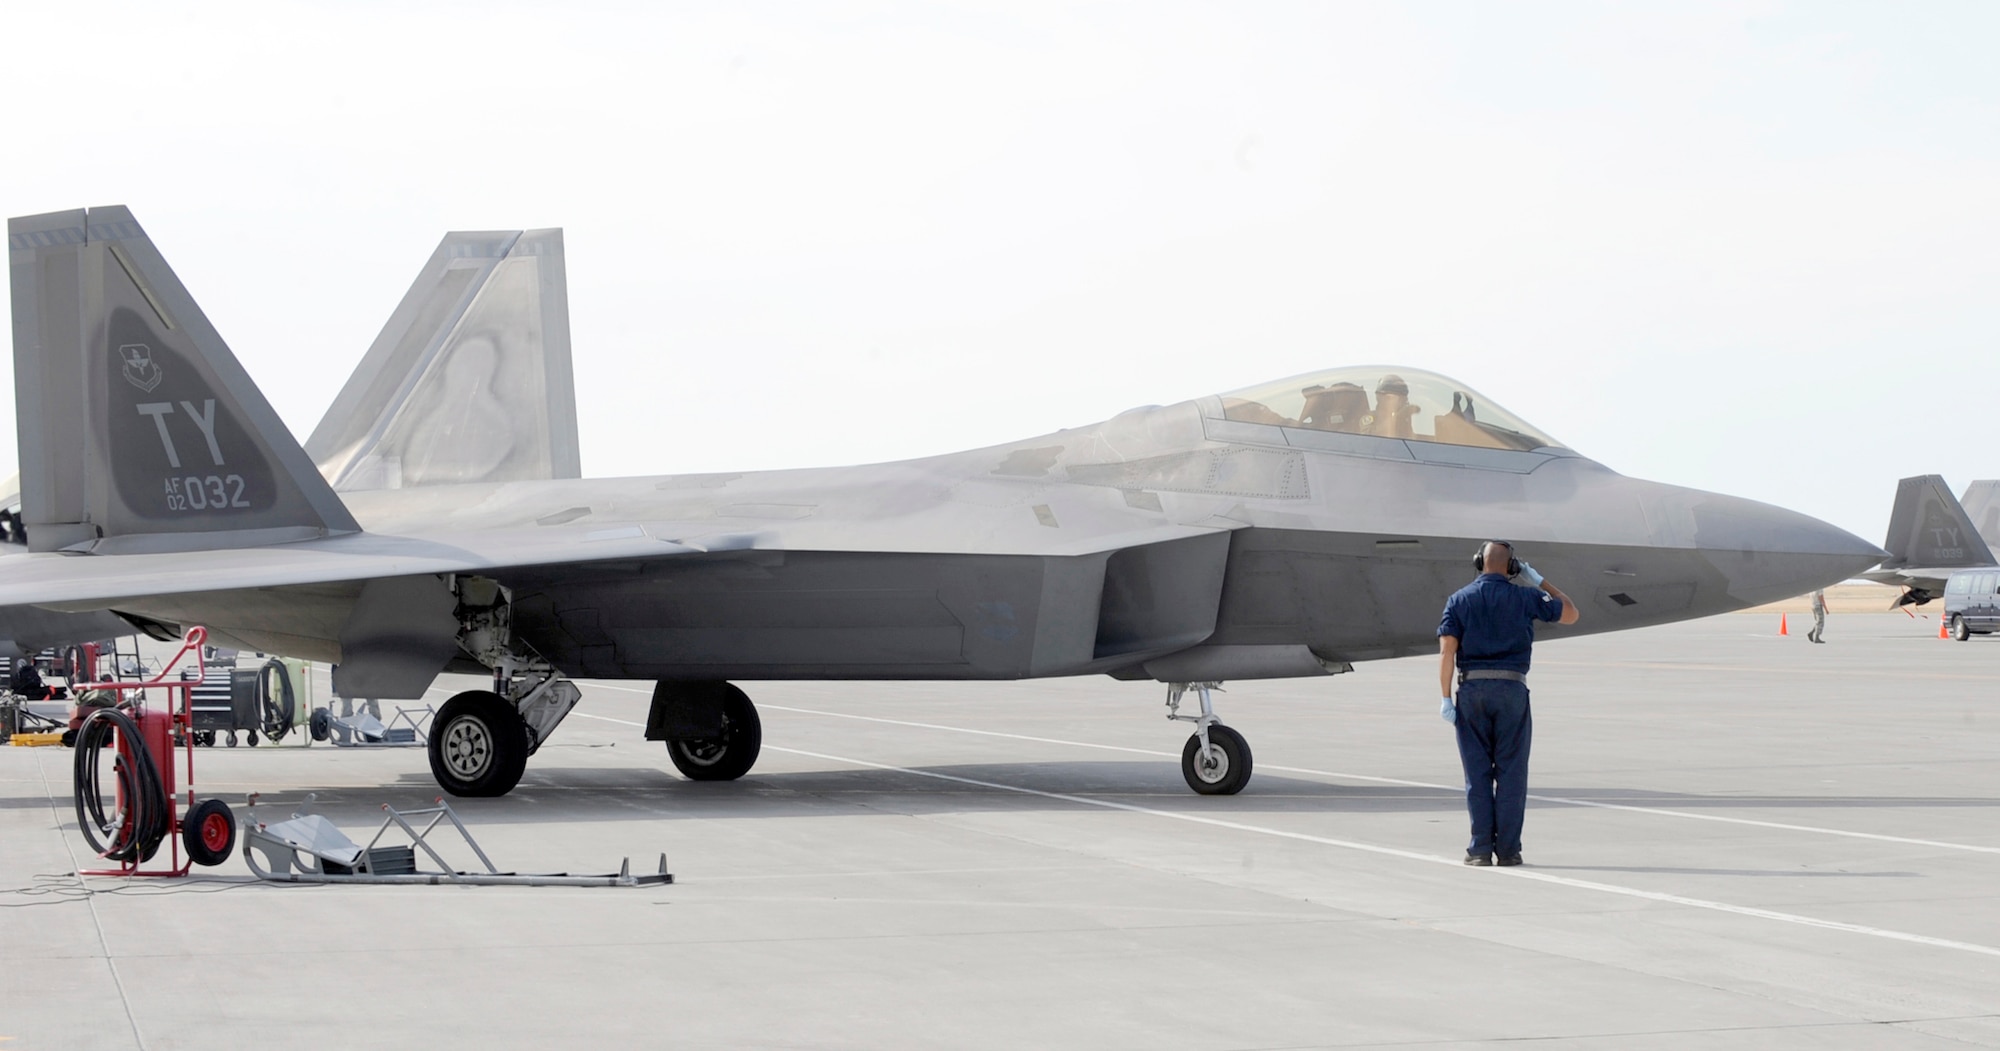 Senior Airman Dez Watson salutes an F-22 Raptor as it taxis toward the runway Aug 6, 2010, at Mountain Home Air Force Base, Idaho. More than 150 Airmen and 12 F-22s from the 43rd Fighter Squadron at Tyndall AFB, Fla., arrived July 31, 2010, in support of the Air Force's first Exercise Global Gem joint training. Airman Watson is a 43rd Aircraft Maintenance Unit crew chief. (U.S. Air Force photo/Airman 1st Class Debbie Lockhart)